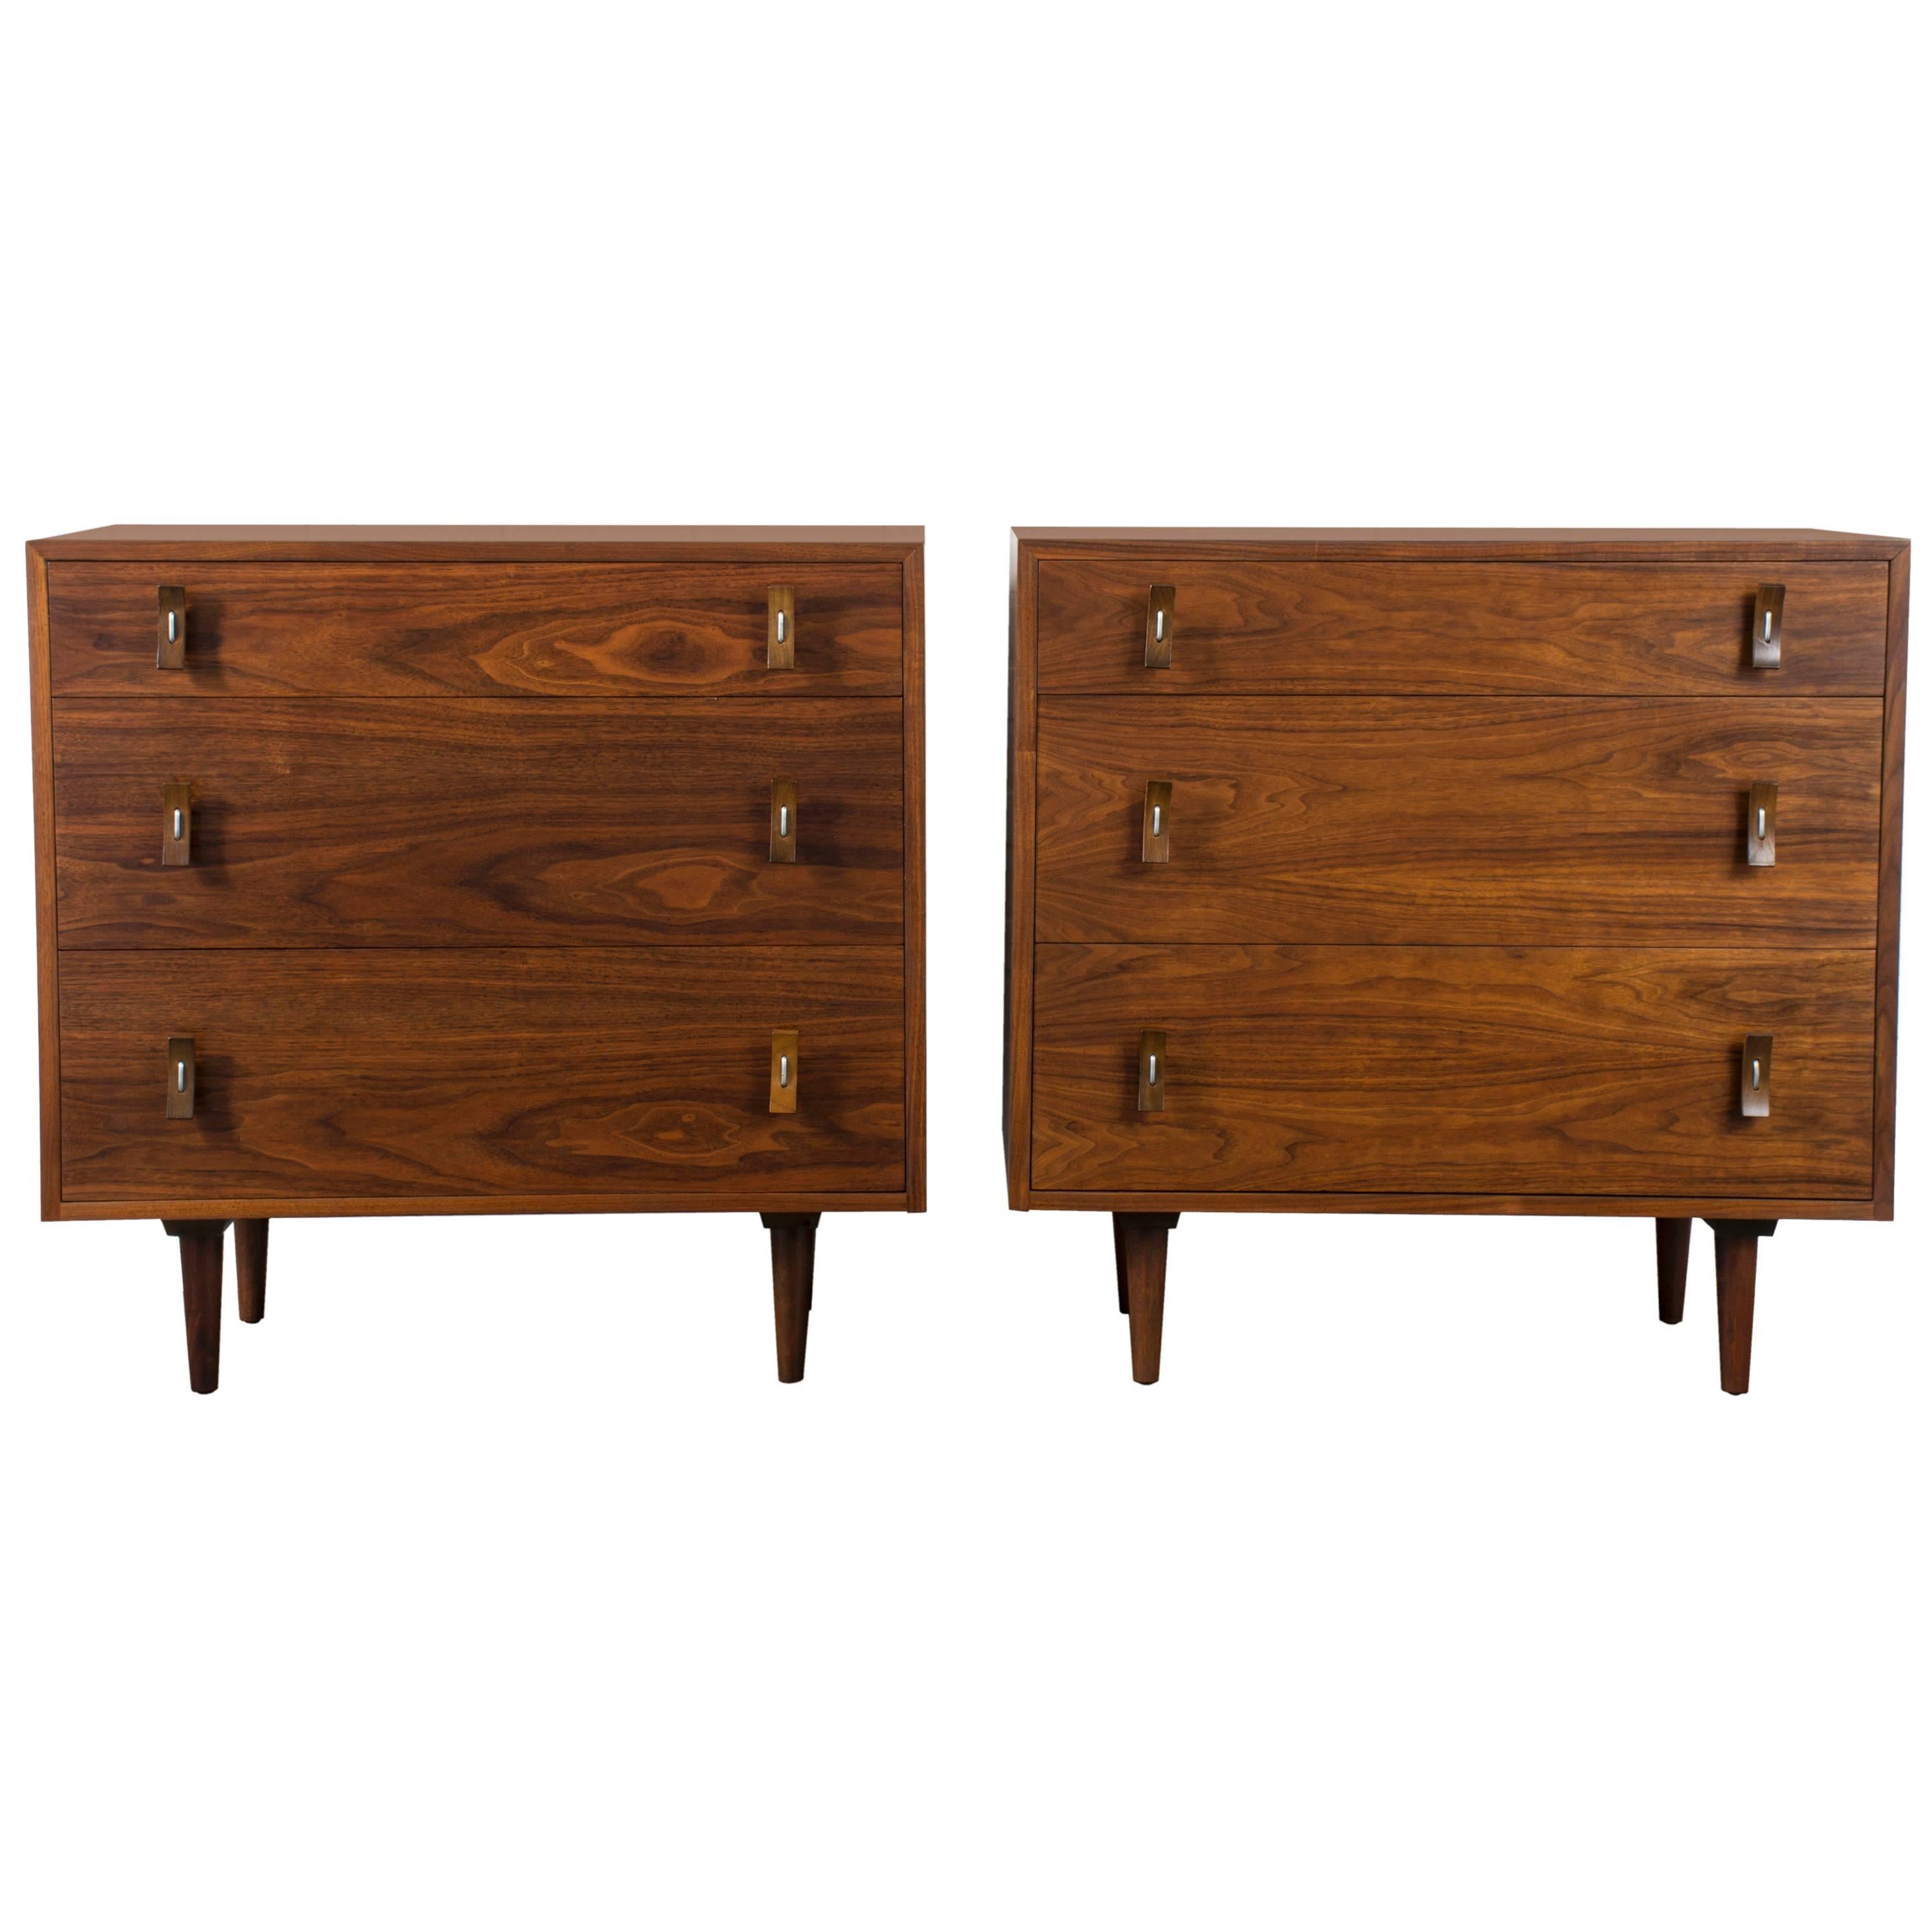 Pair of Vintage Mid-Century Dressers by Stanley Young for Glenn of California